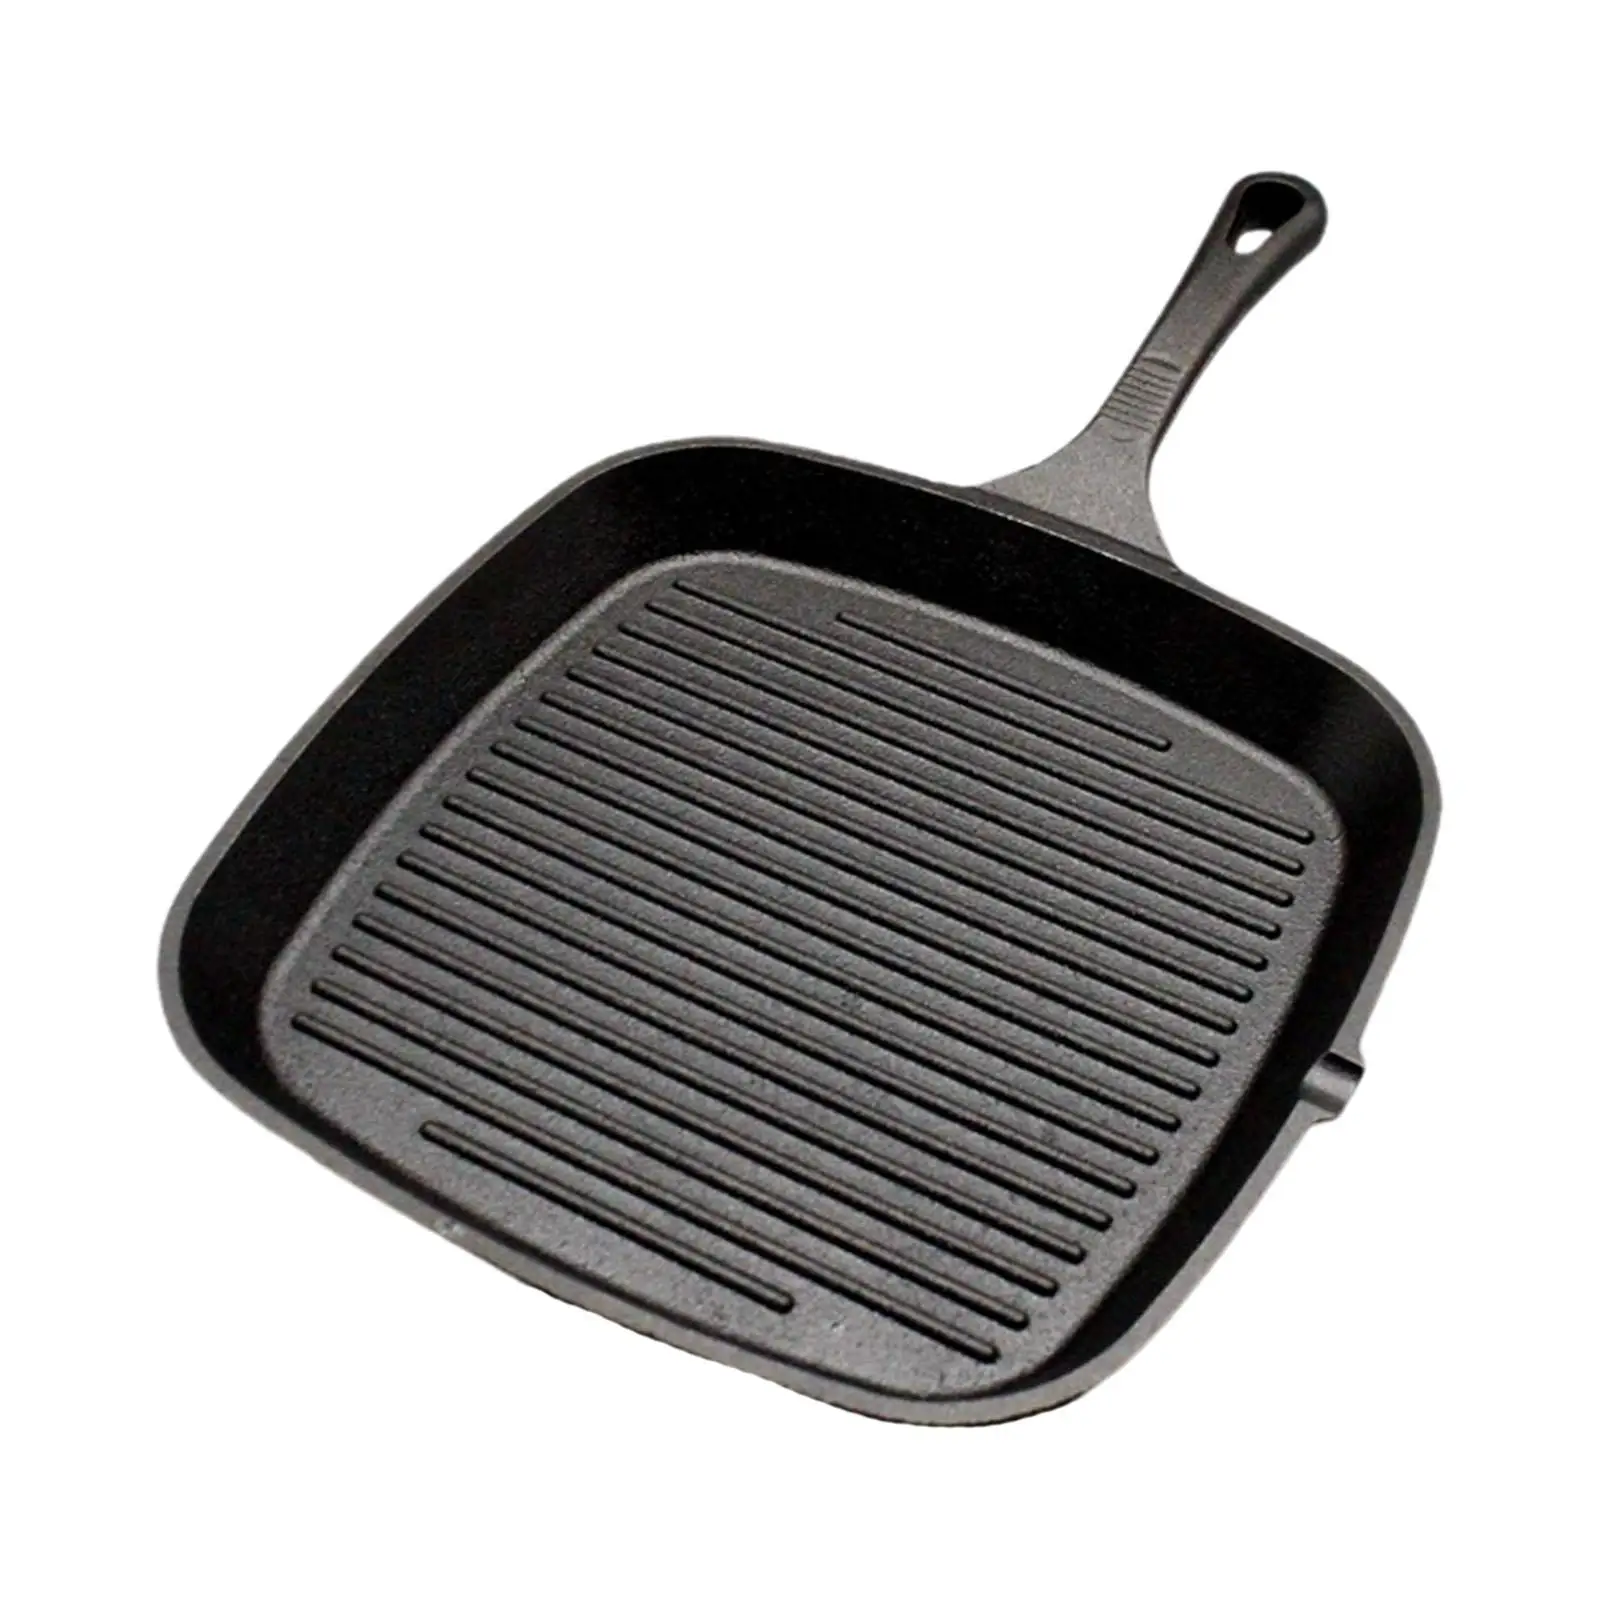 Nonstick Grill Pan Skillet Tool Supplies Teppanyaki Large Portable Nonstick Frying Pan Griddle Pans for Kitchen Camping Home